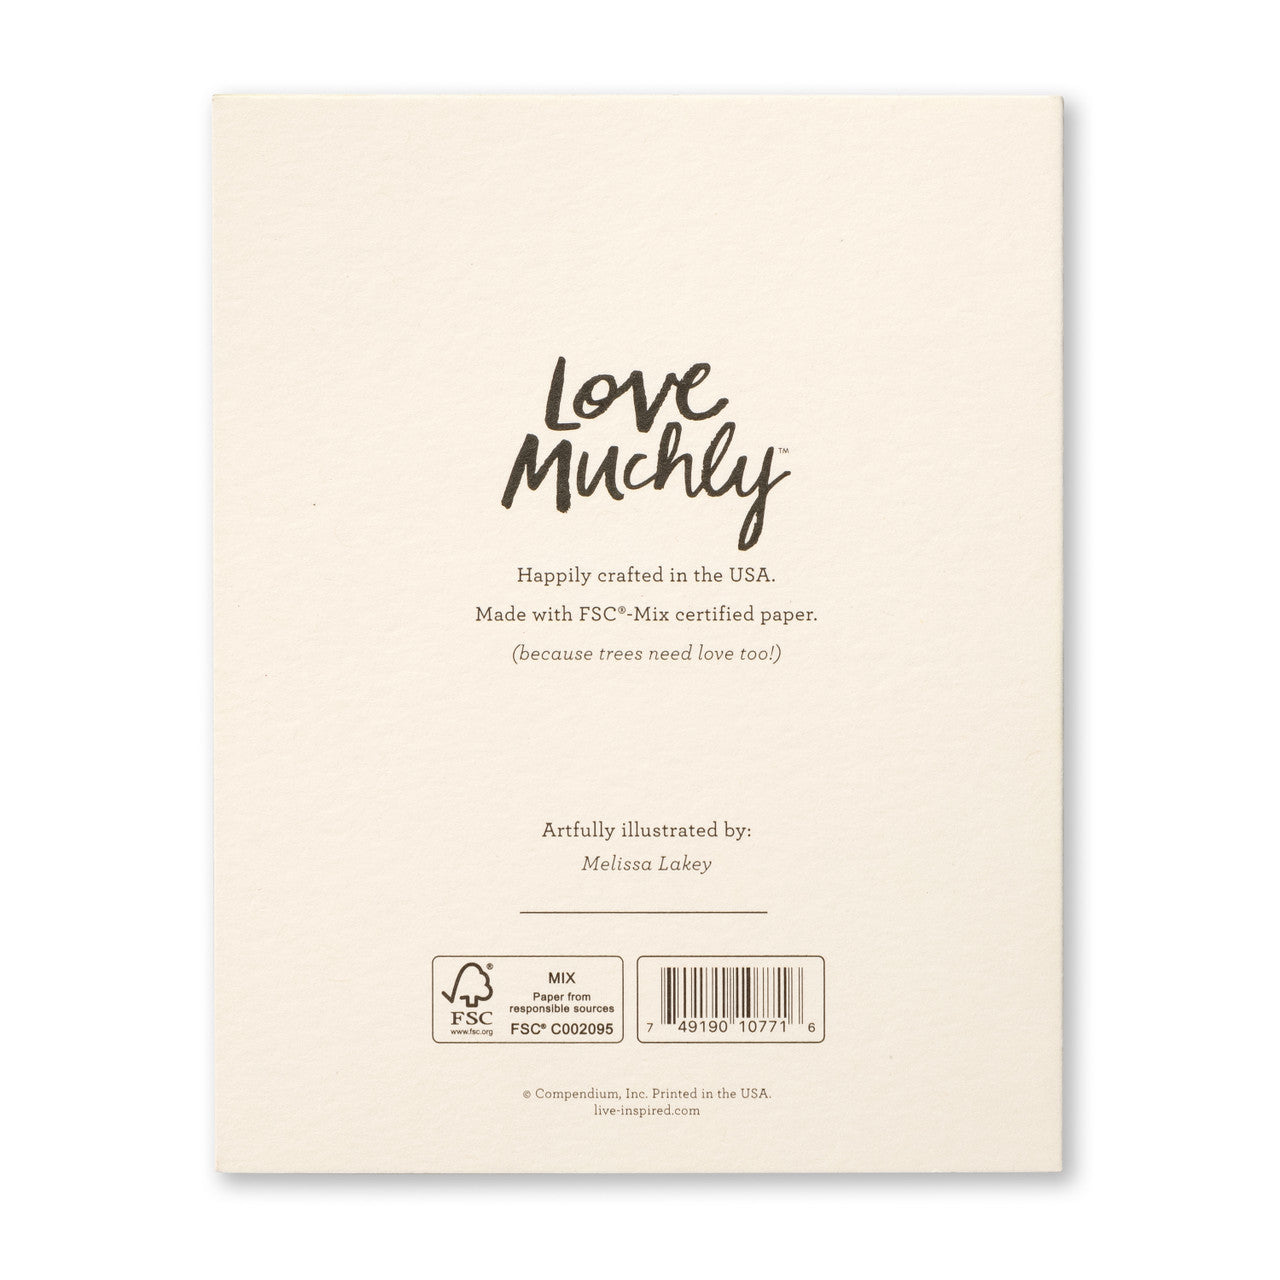 Love Muchly Greeting Card - Birthday - You've Got Sweet Things Coming - Mellow Monkey